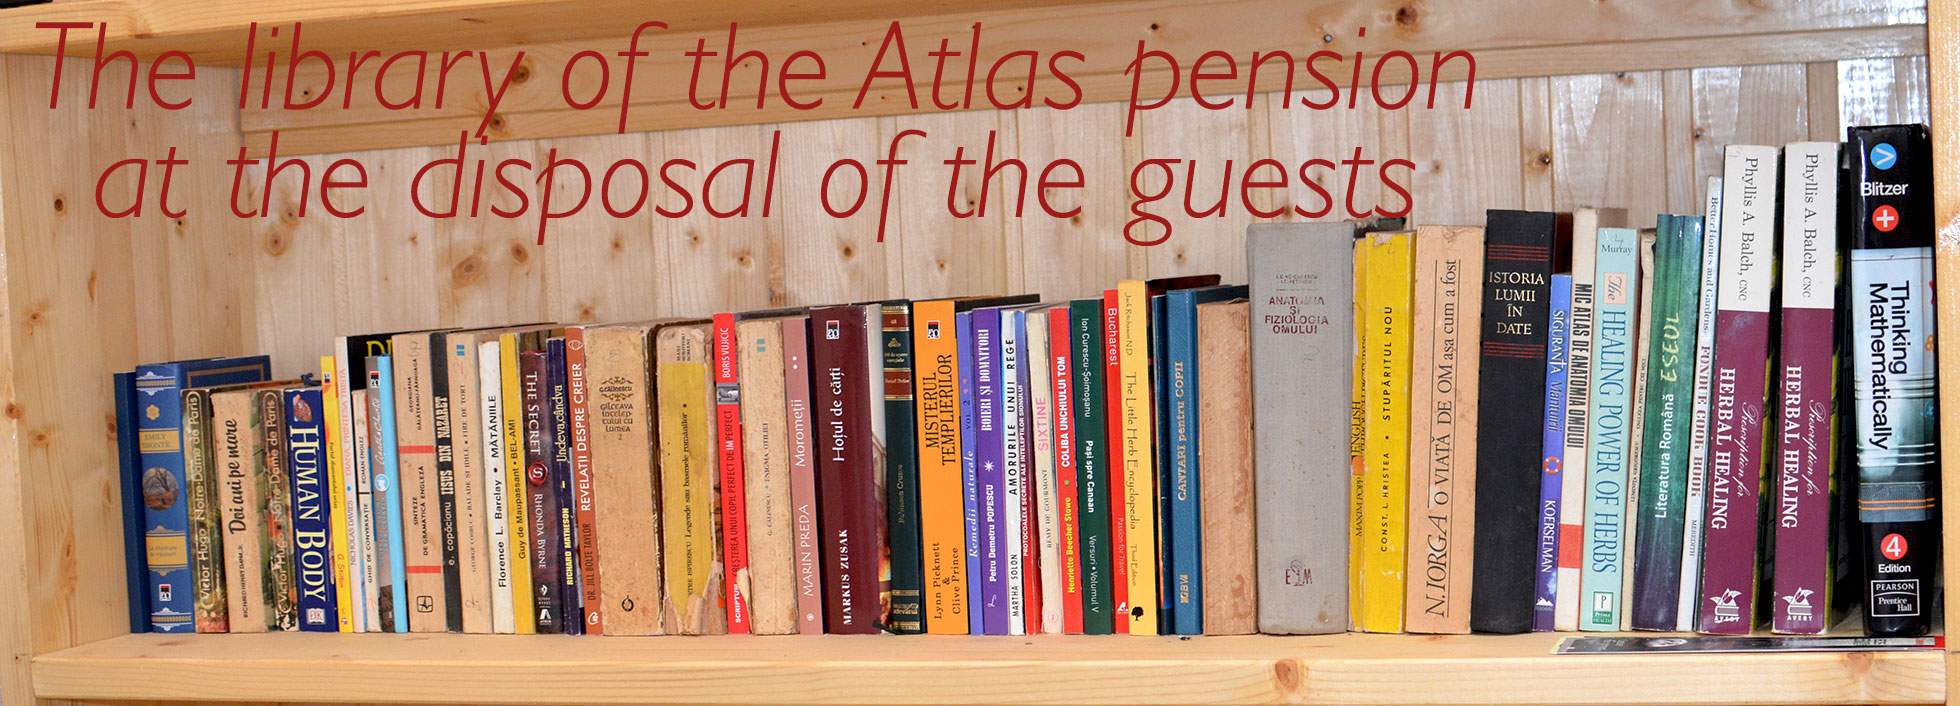 The library of the Atlas pension at the disposal of the guests